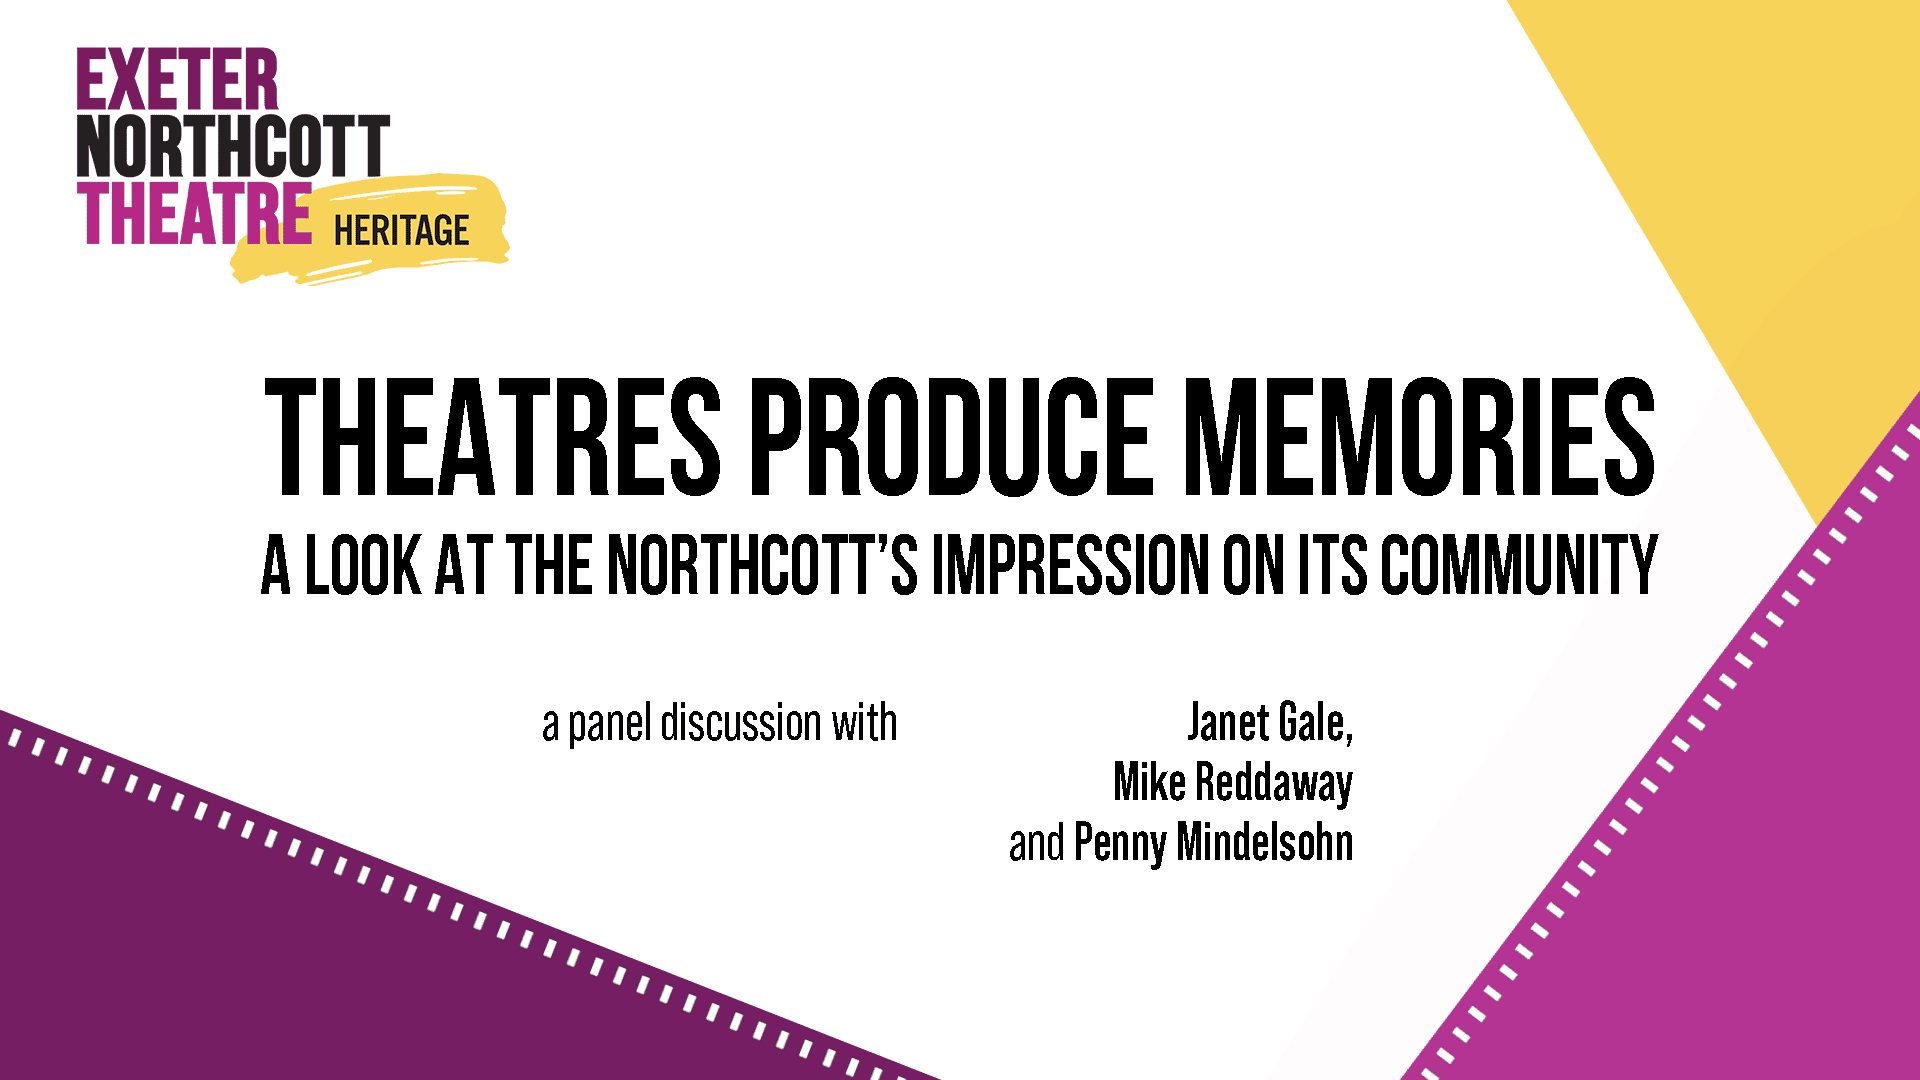 Exeter Northcott Theatre Heritage logo - Theatres Produce Memories: a look at the Northcott’s impression on its community. A panel discussion with Janet Gale, Mike Reddaway and Penny Mindelsohn